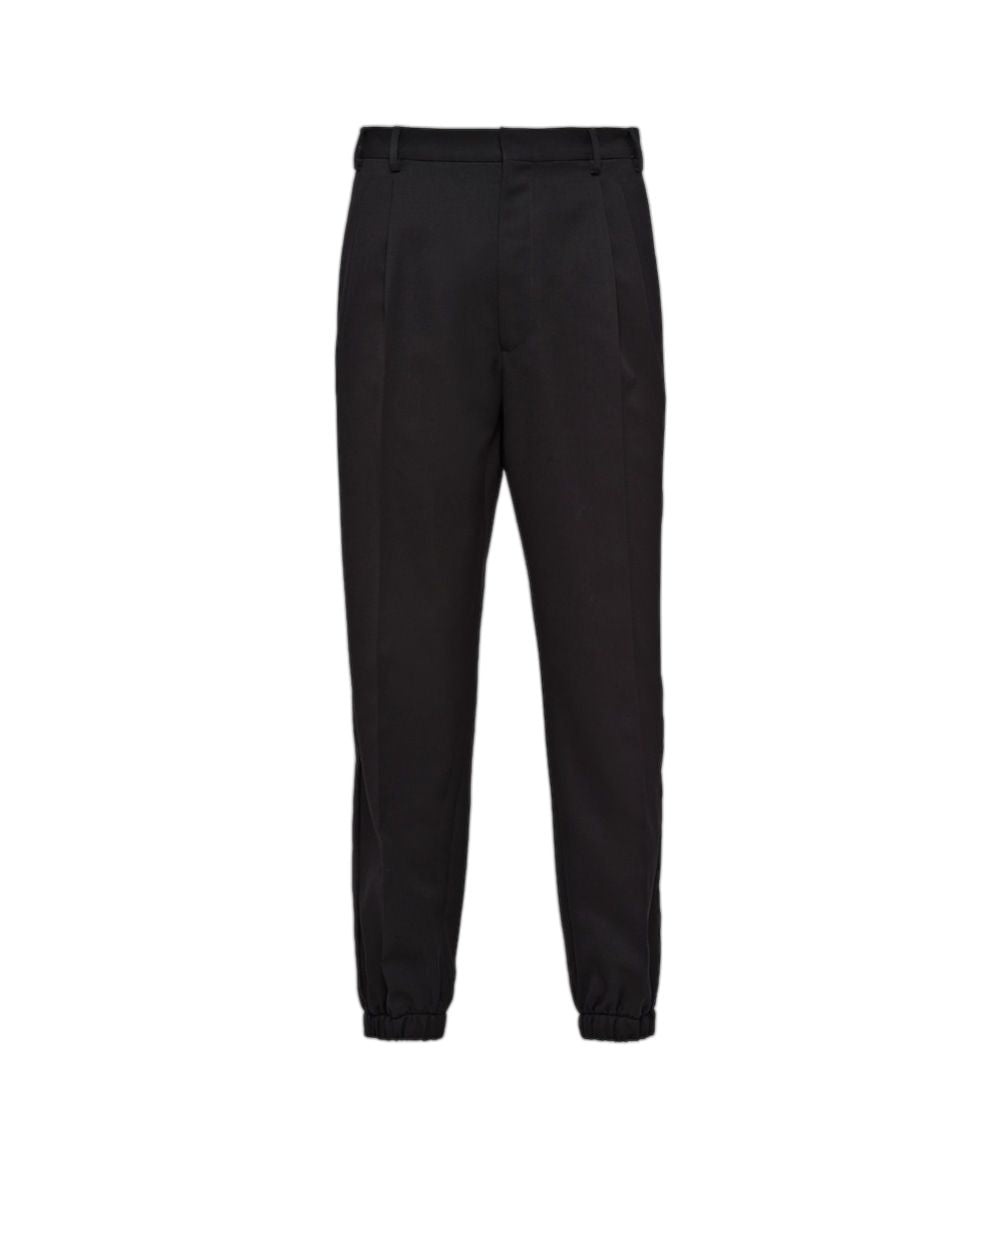 PRADA Classic Black Woven Pants for Men from the SS24 Collection